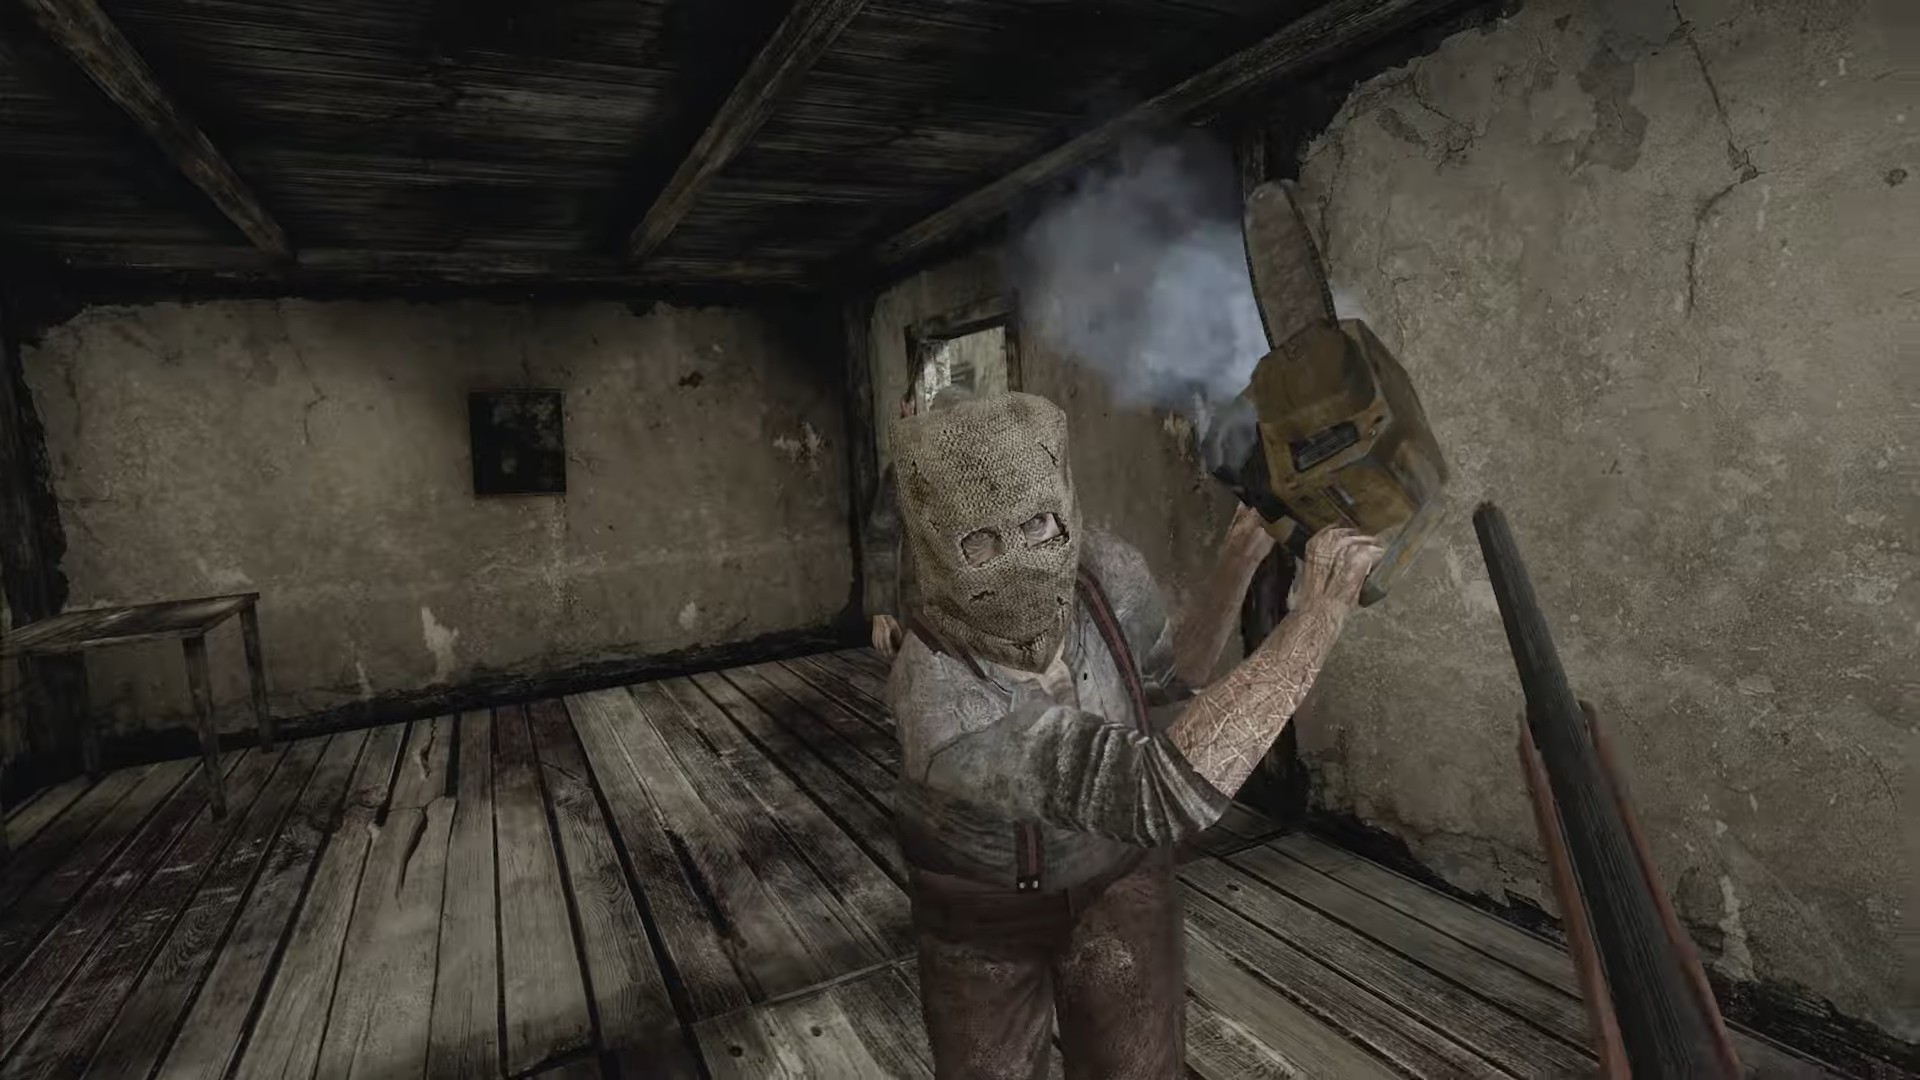 5 essential mods for Resident Evil 4 to enhance your experience